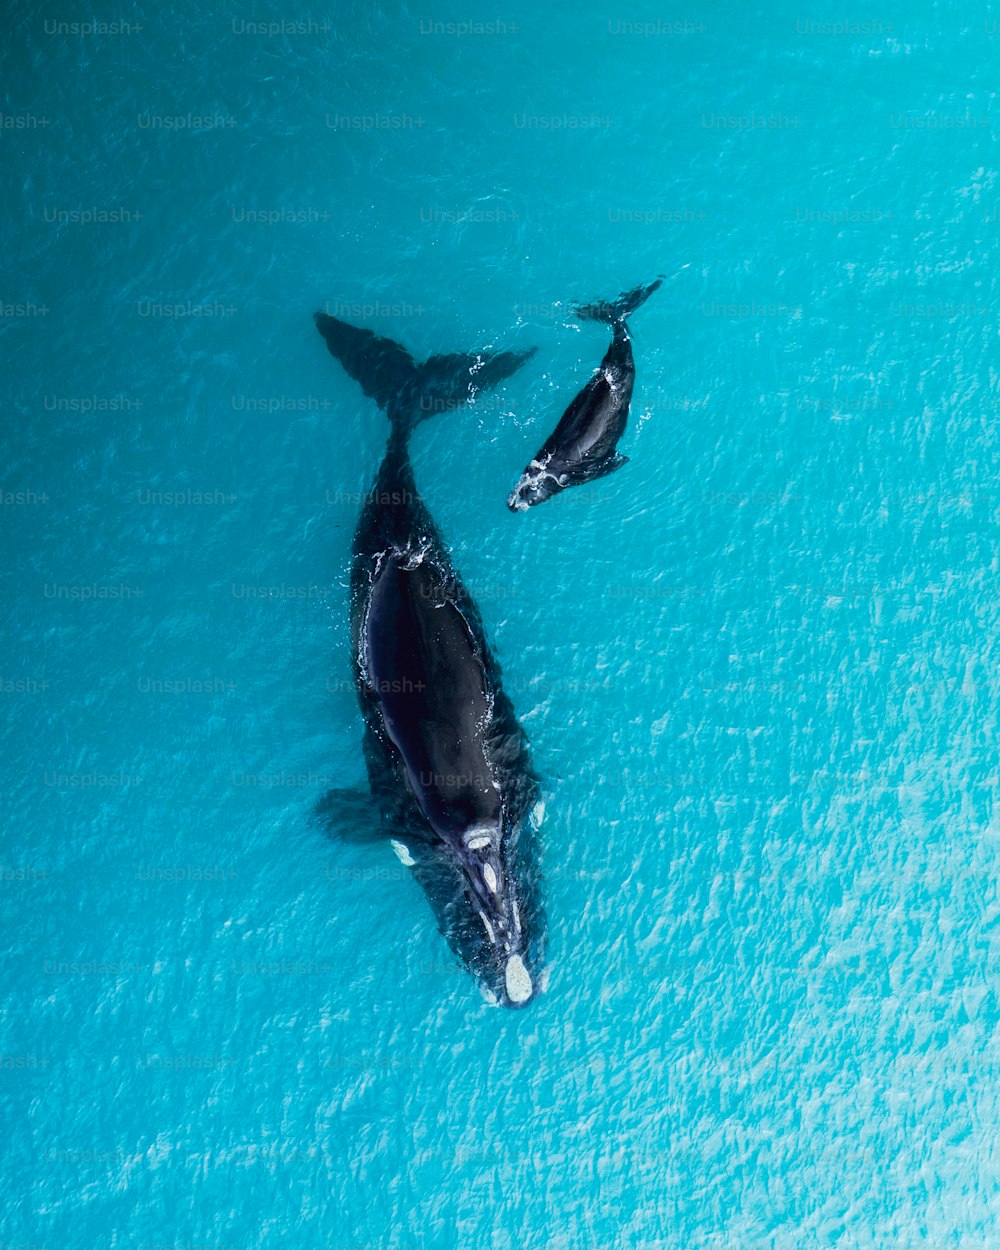 A beautiful shot of a Southern right whale